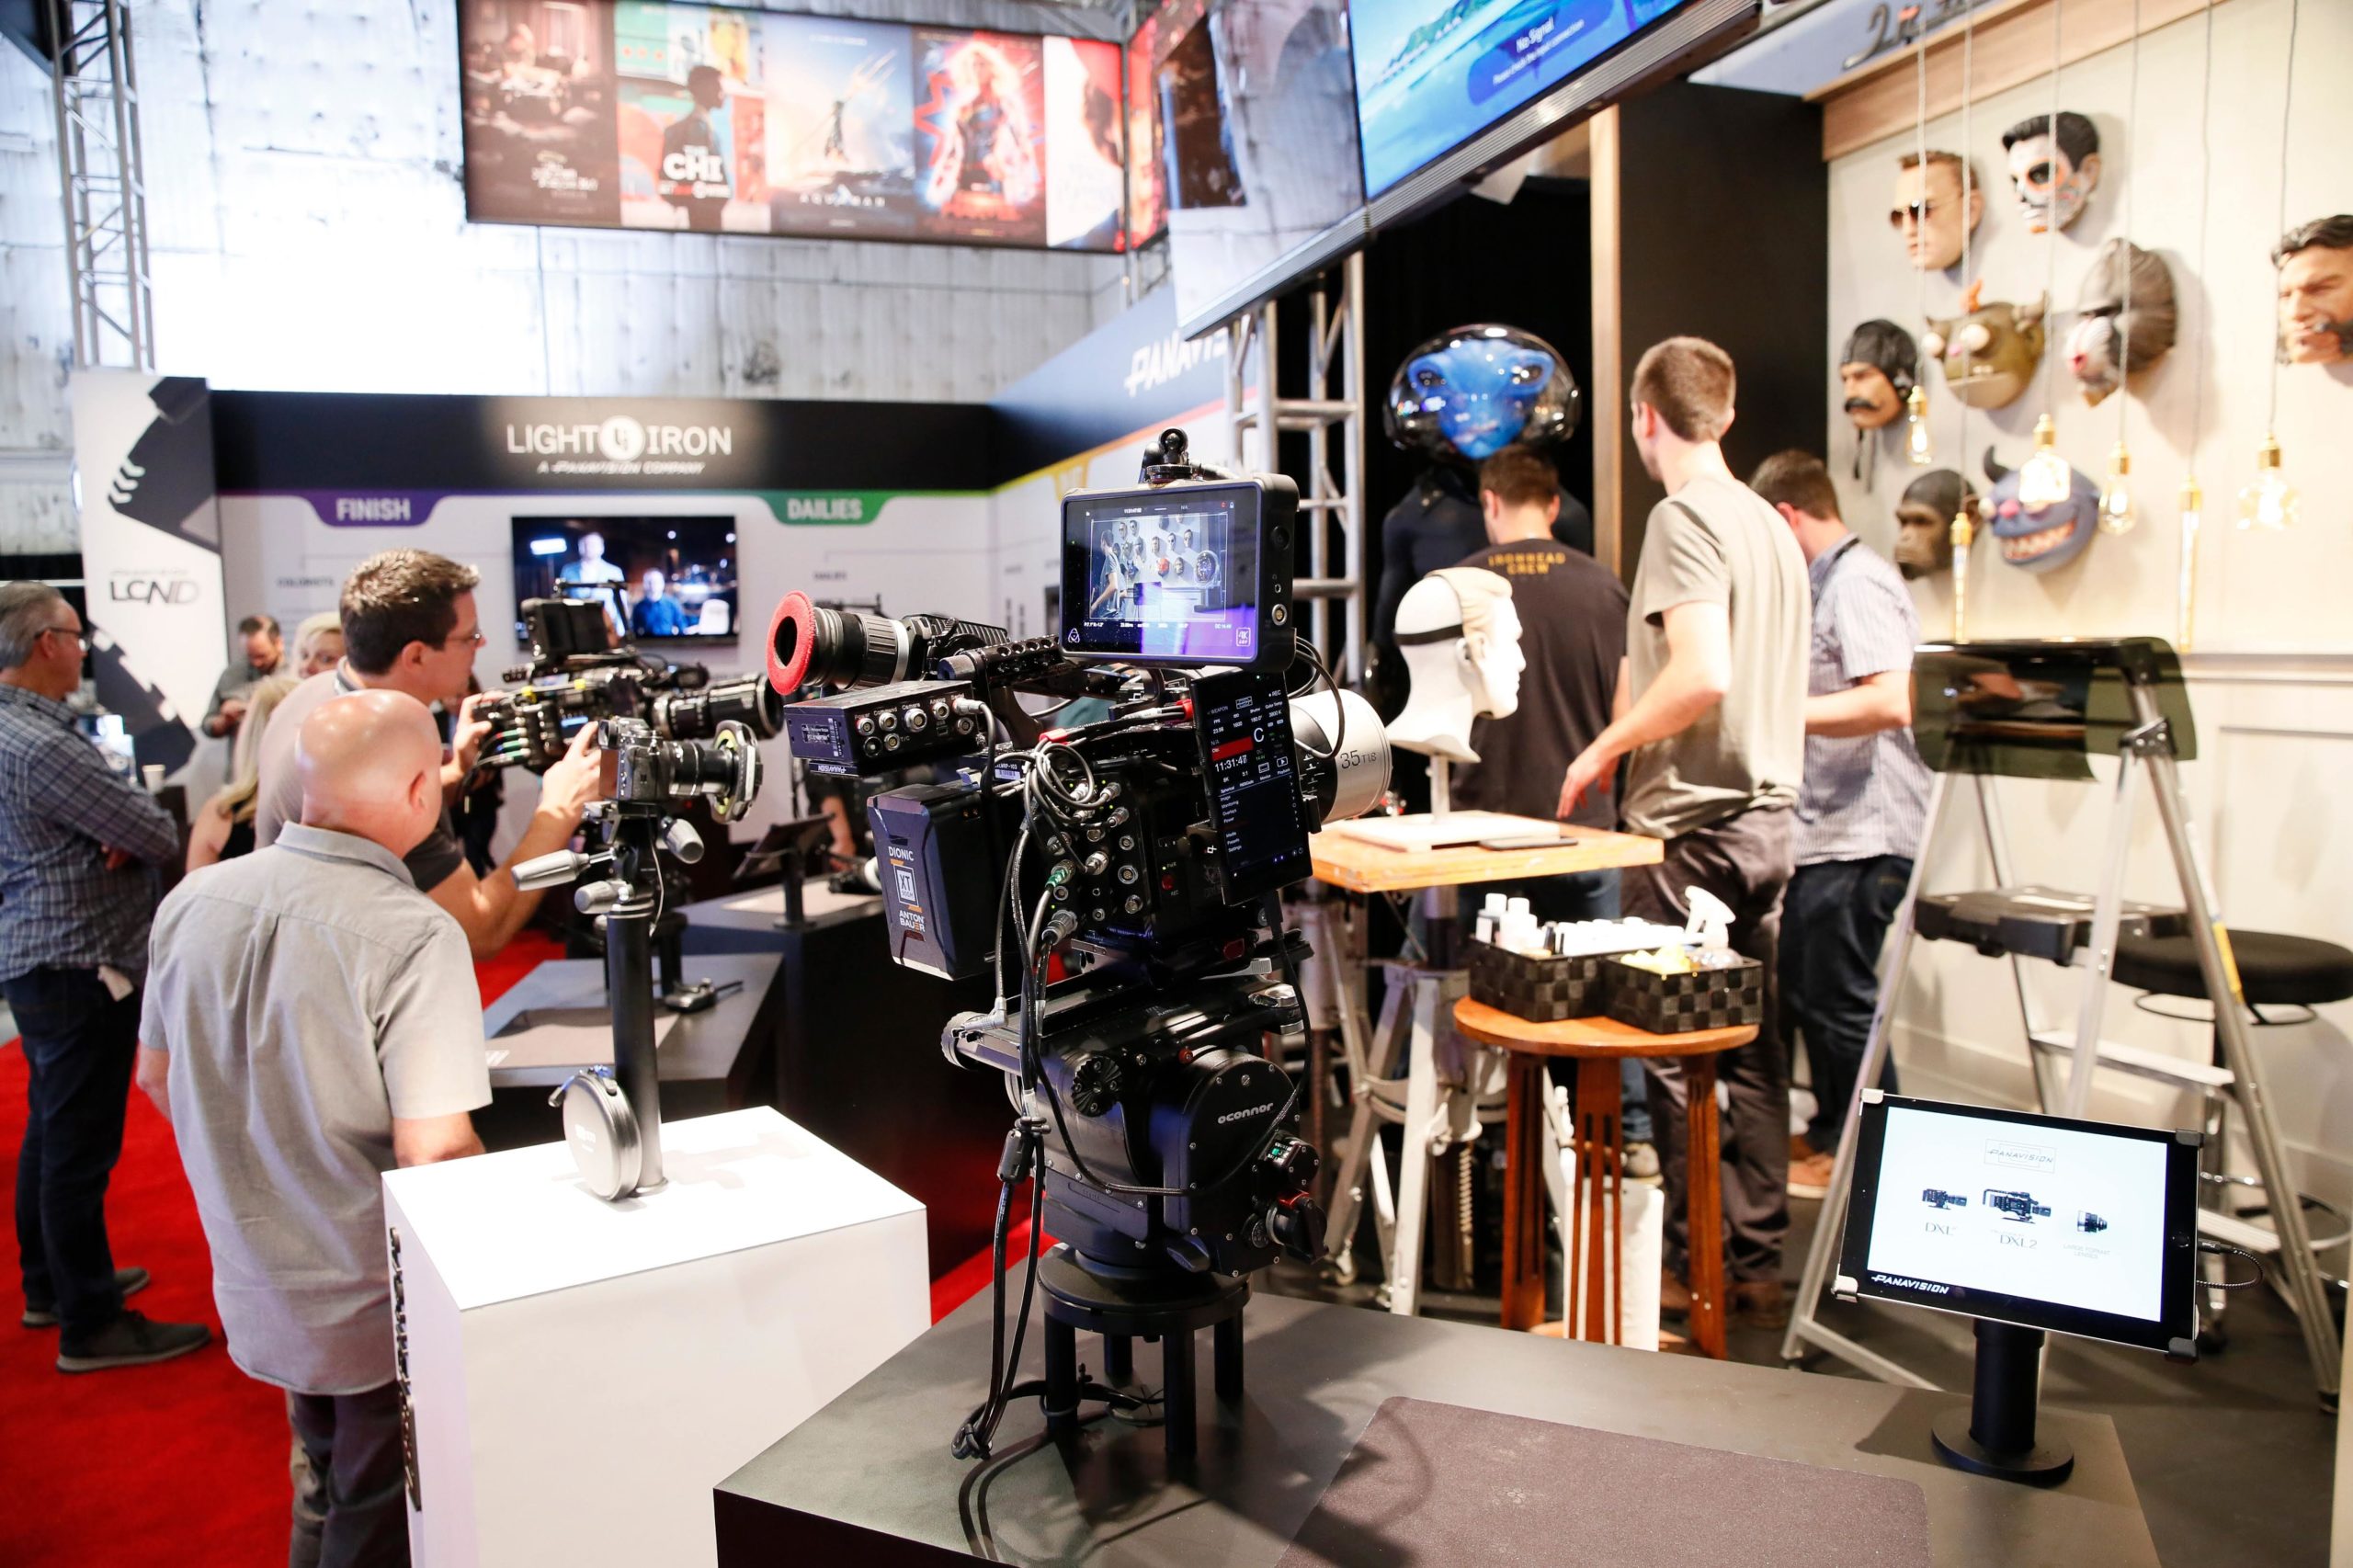 Fuller Street Tradeshow Booth Three60 Event Production Management Services Cinegear